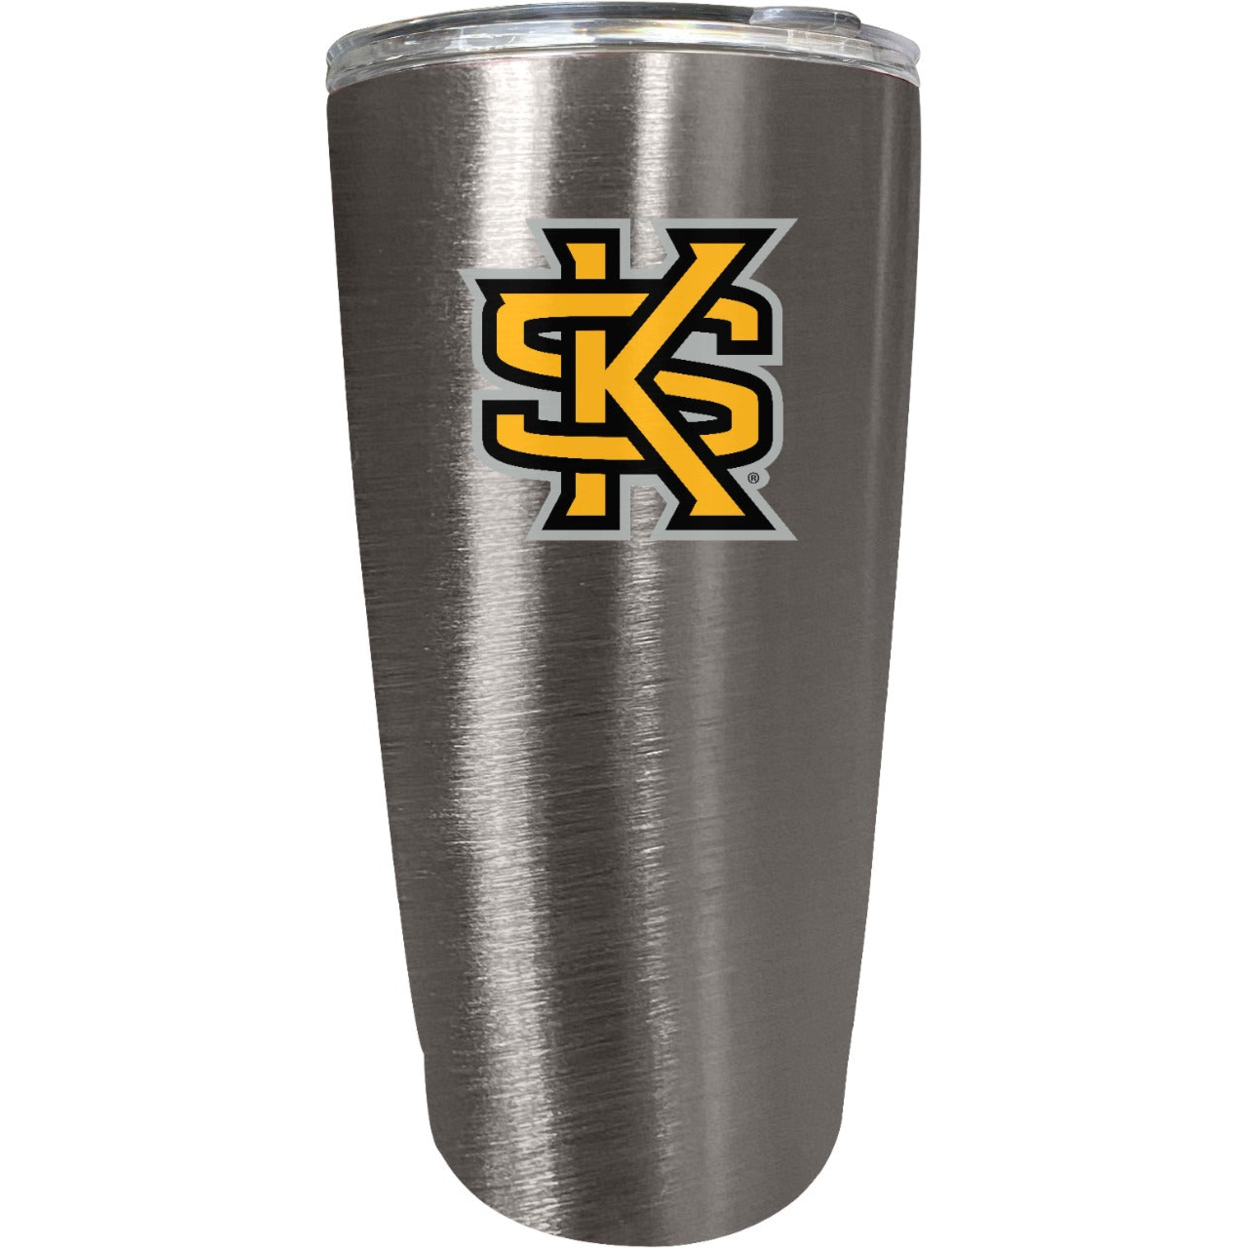 Kennesaw State University 16 Oz Insulated Stainless Steel Tumbler Colorless